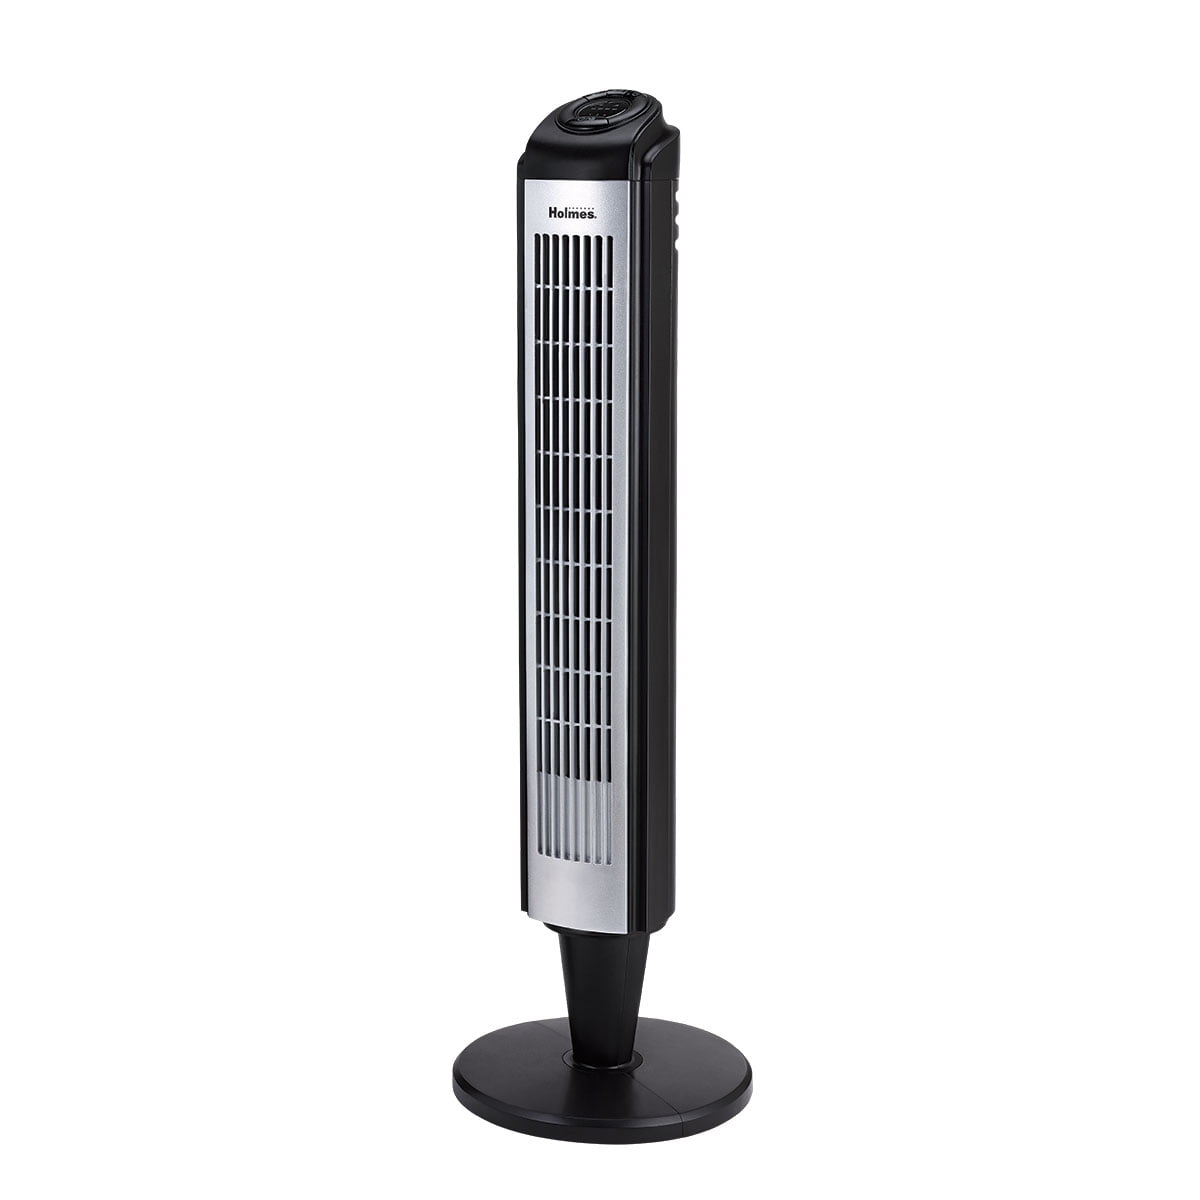 Seville Classics Tower Fan Oscillating 40 Inch Tilt Remote Control Cooling White 